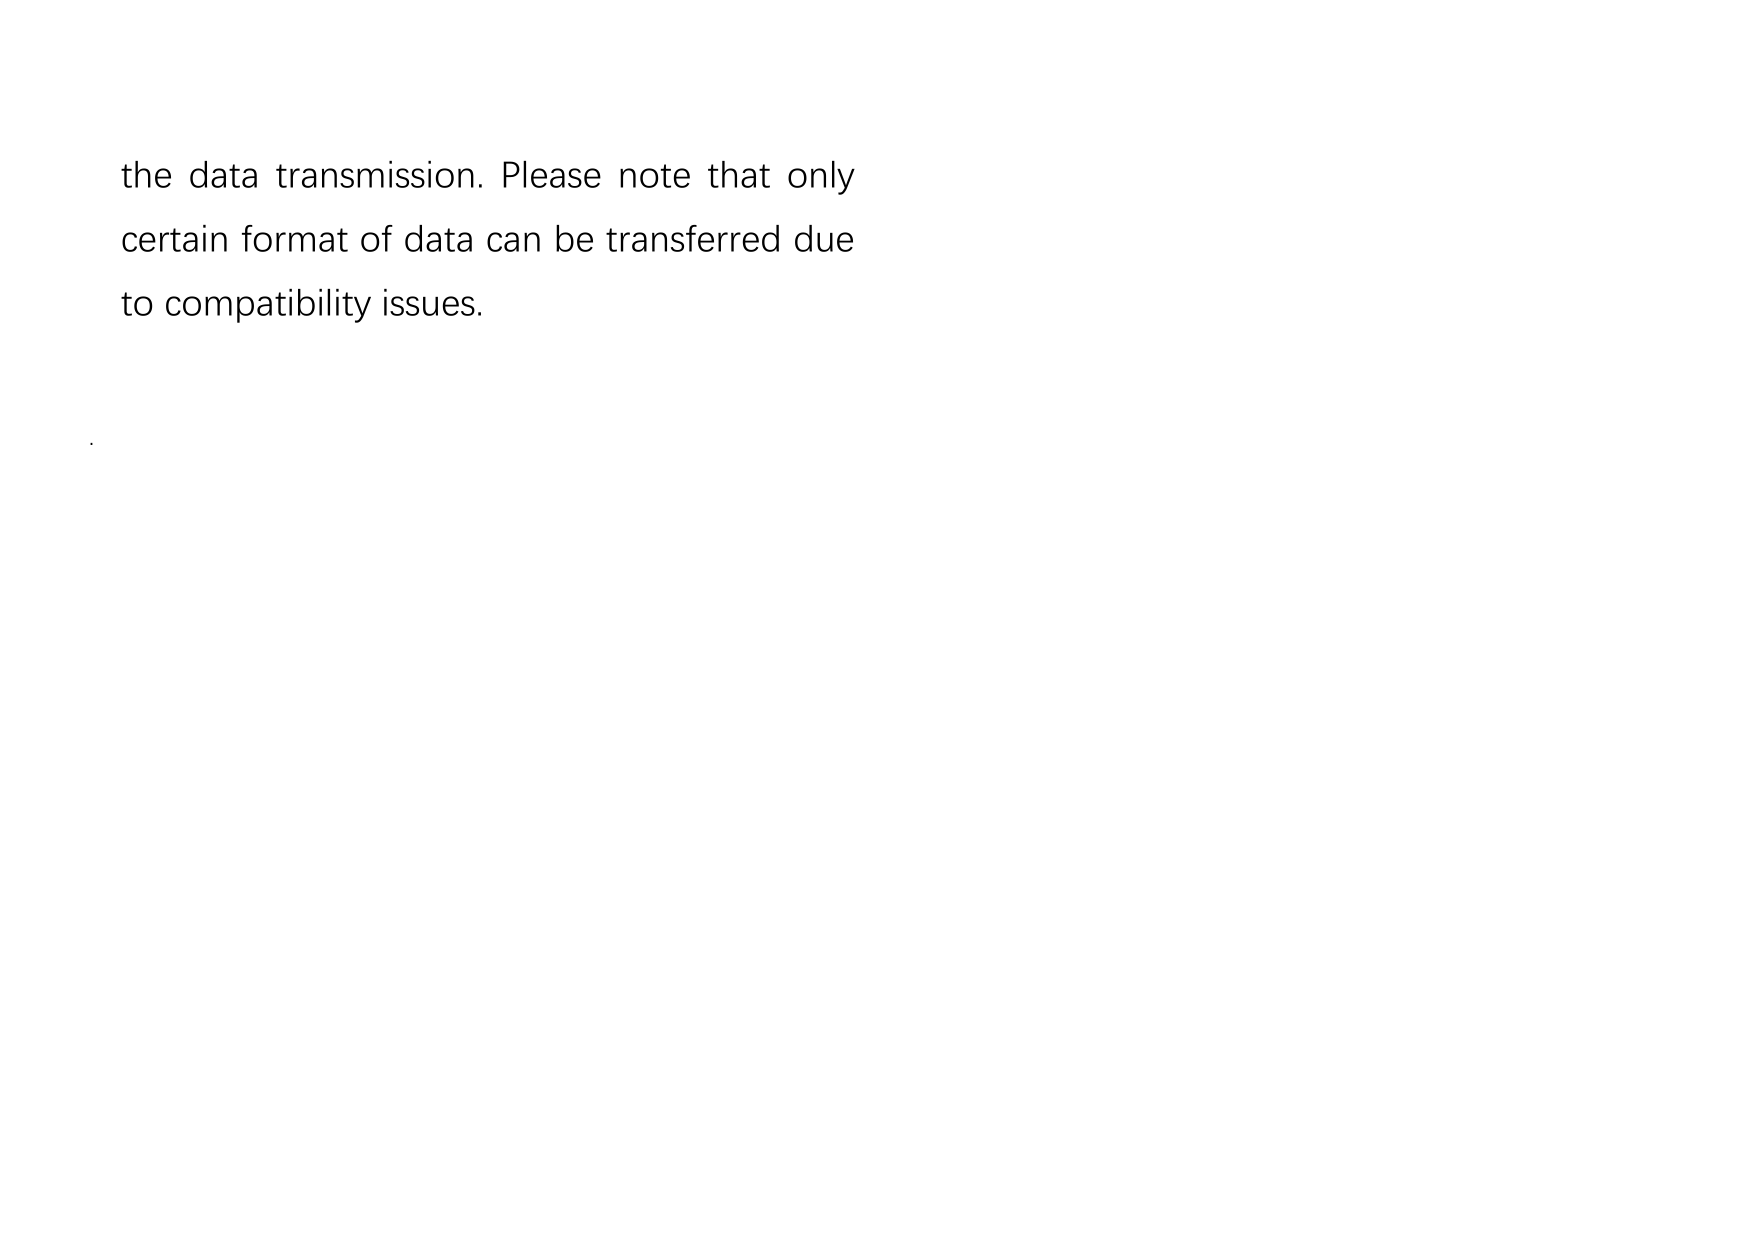 the data transmission. Please note that onlycertain format of data can be transferred dueto compatibility issues..